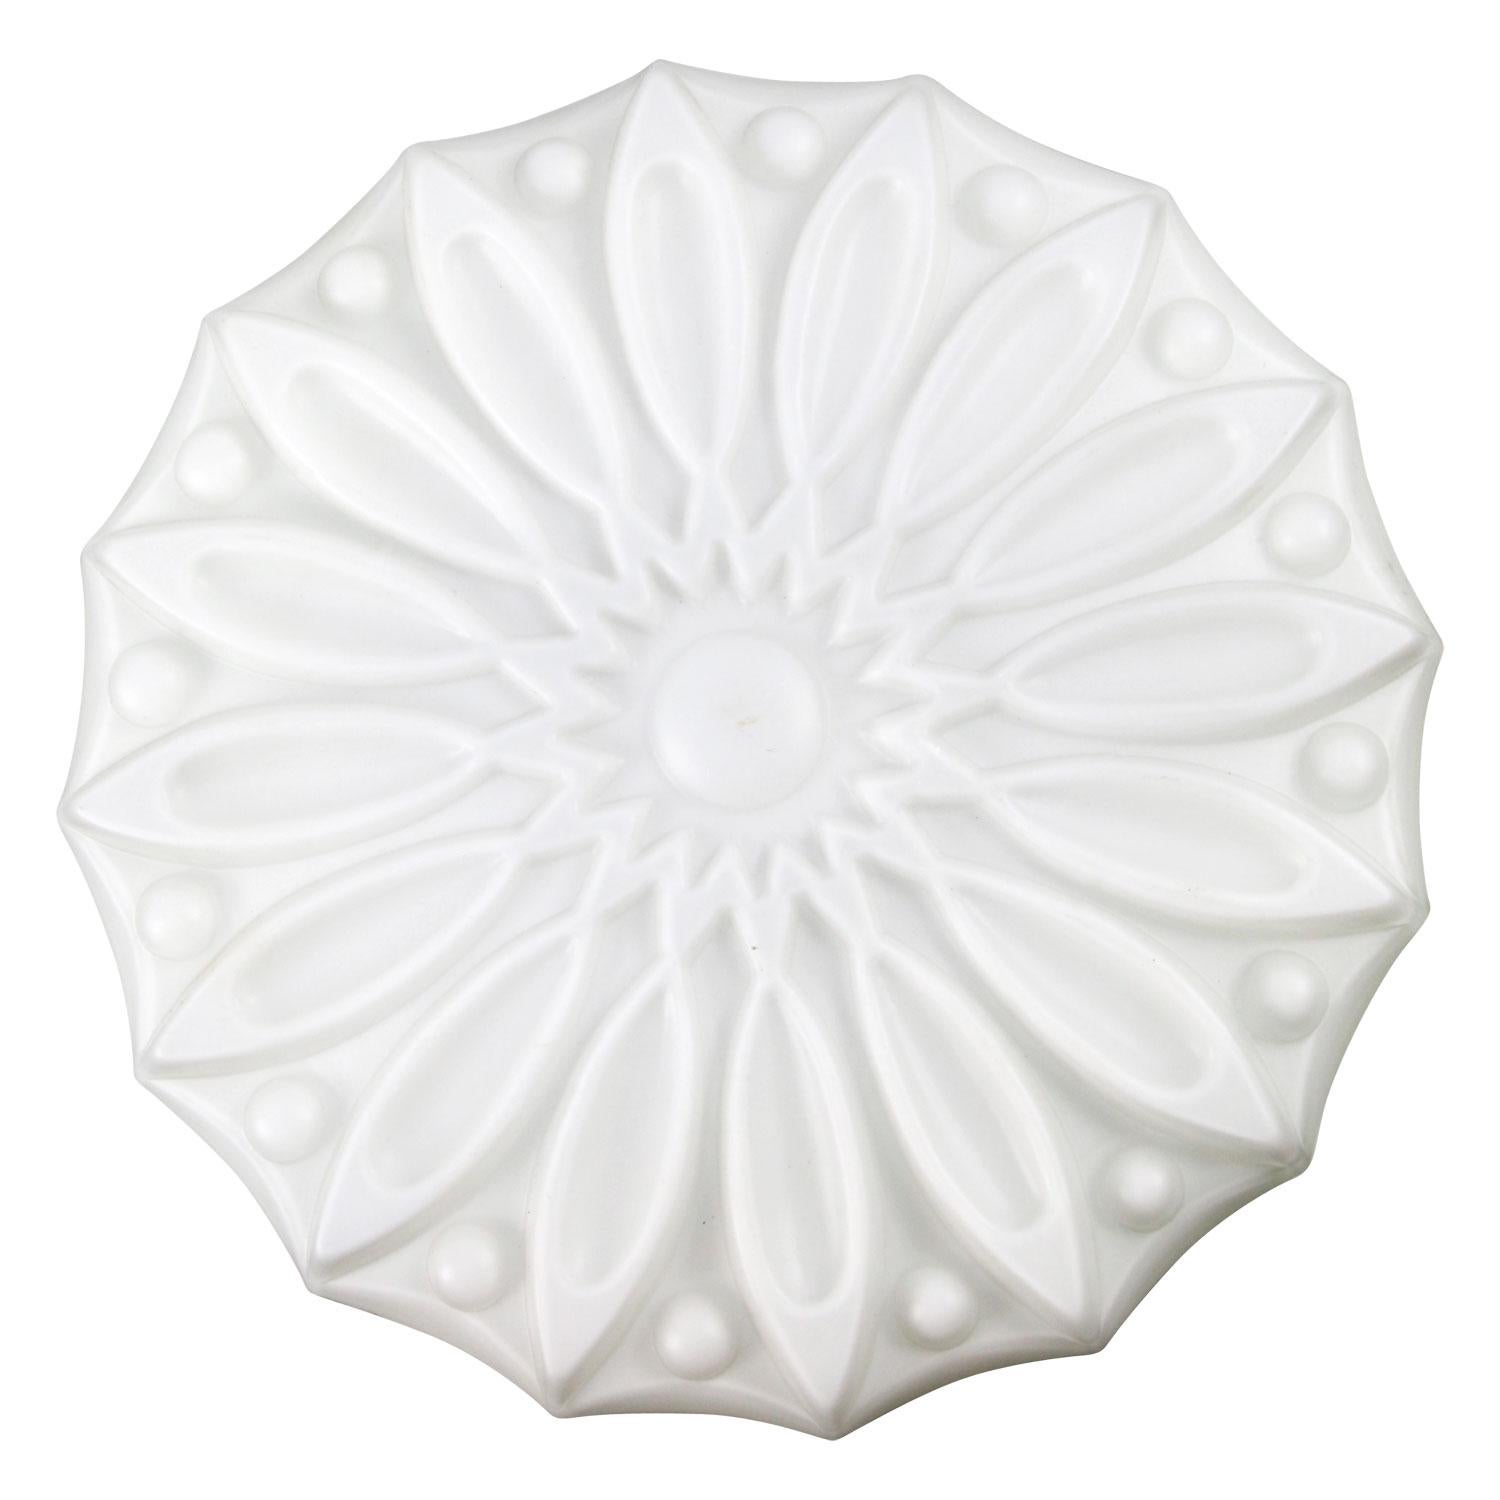 Opaline milk glass ceiling / wall lamp.
Aluminum base with glass.

Weight: 1.50 kg / 3.3 lb

Priced per individual item. All lamps have been made suitable by international standards for incandescent light bulbs, energy-efficient and LED bulbs.